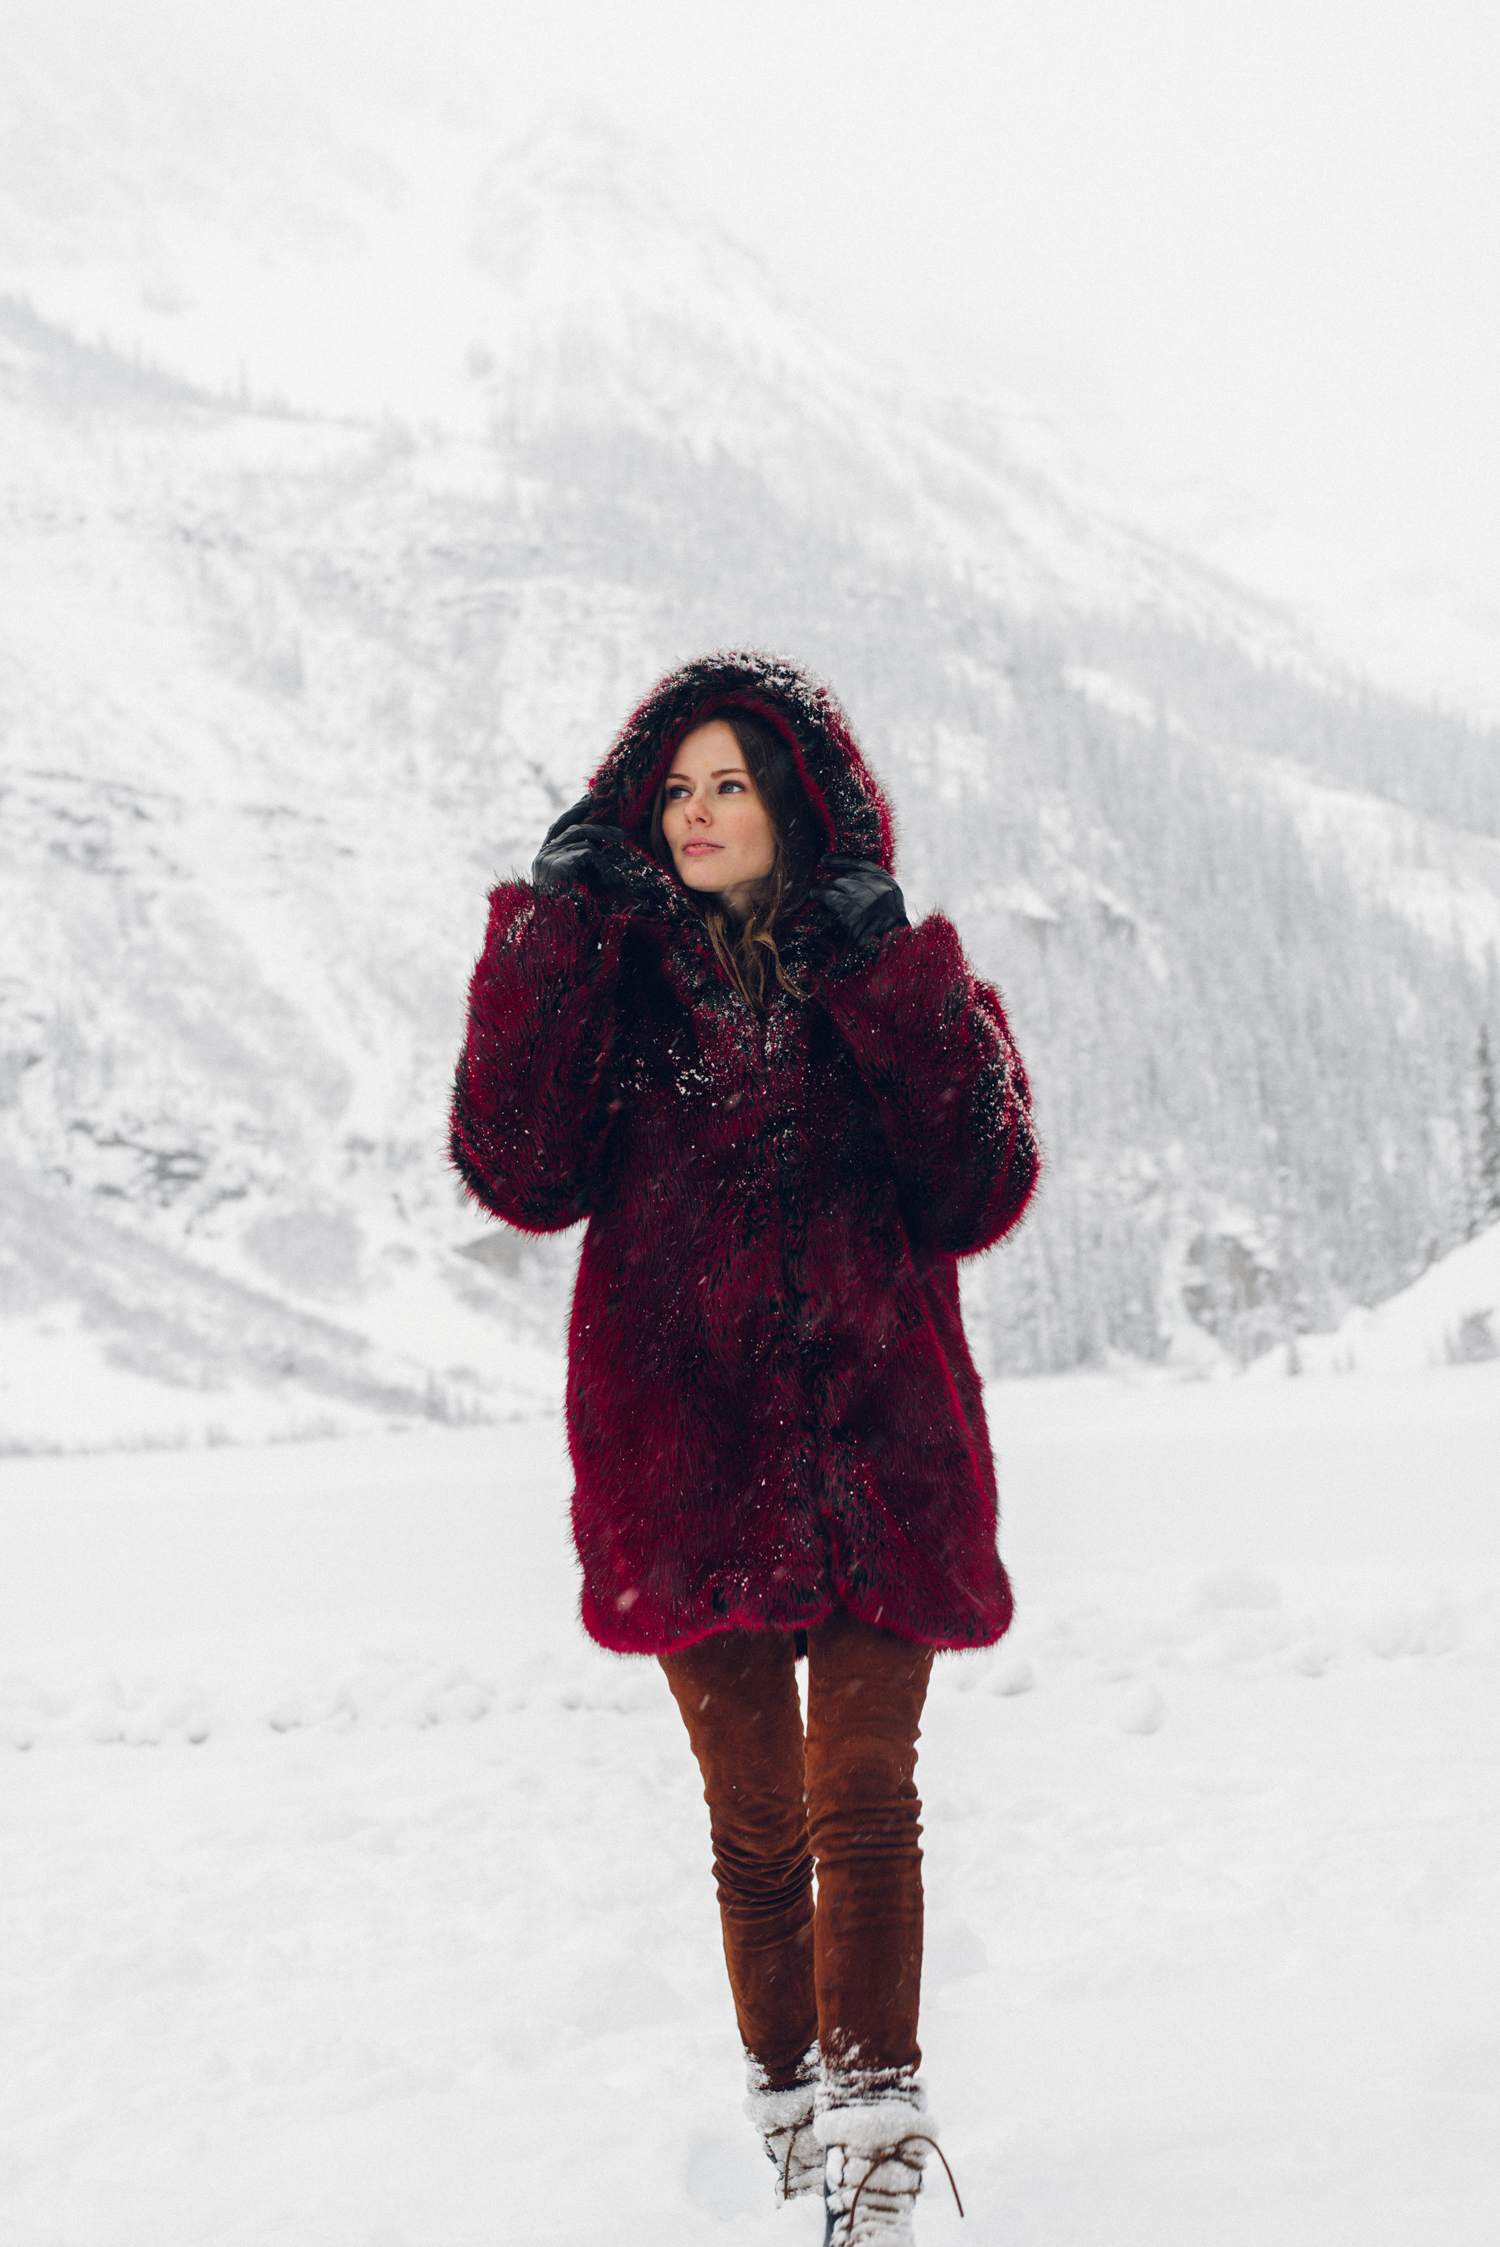 Alyssa Campanella of The A List blog experiences romance in the snow with her husband in Lake Louise, Alberta, Canada